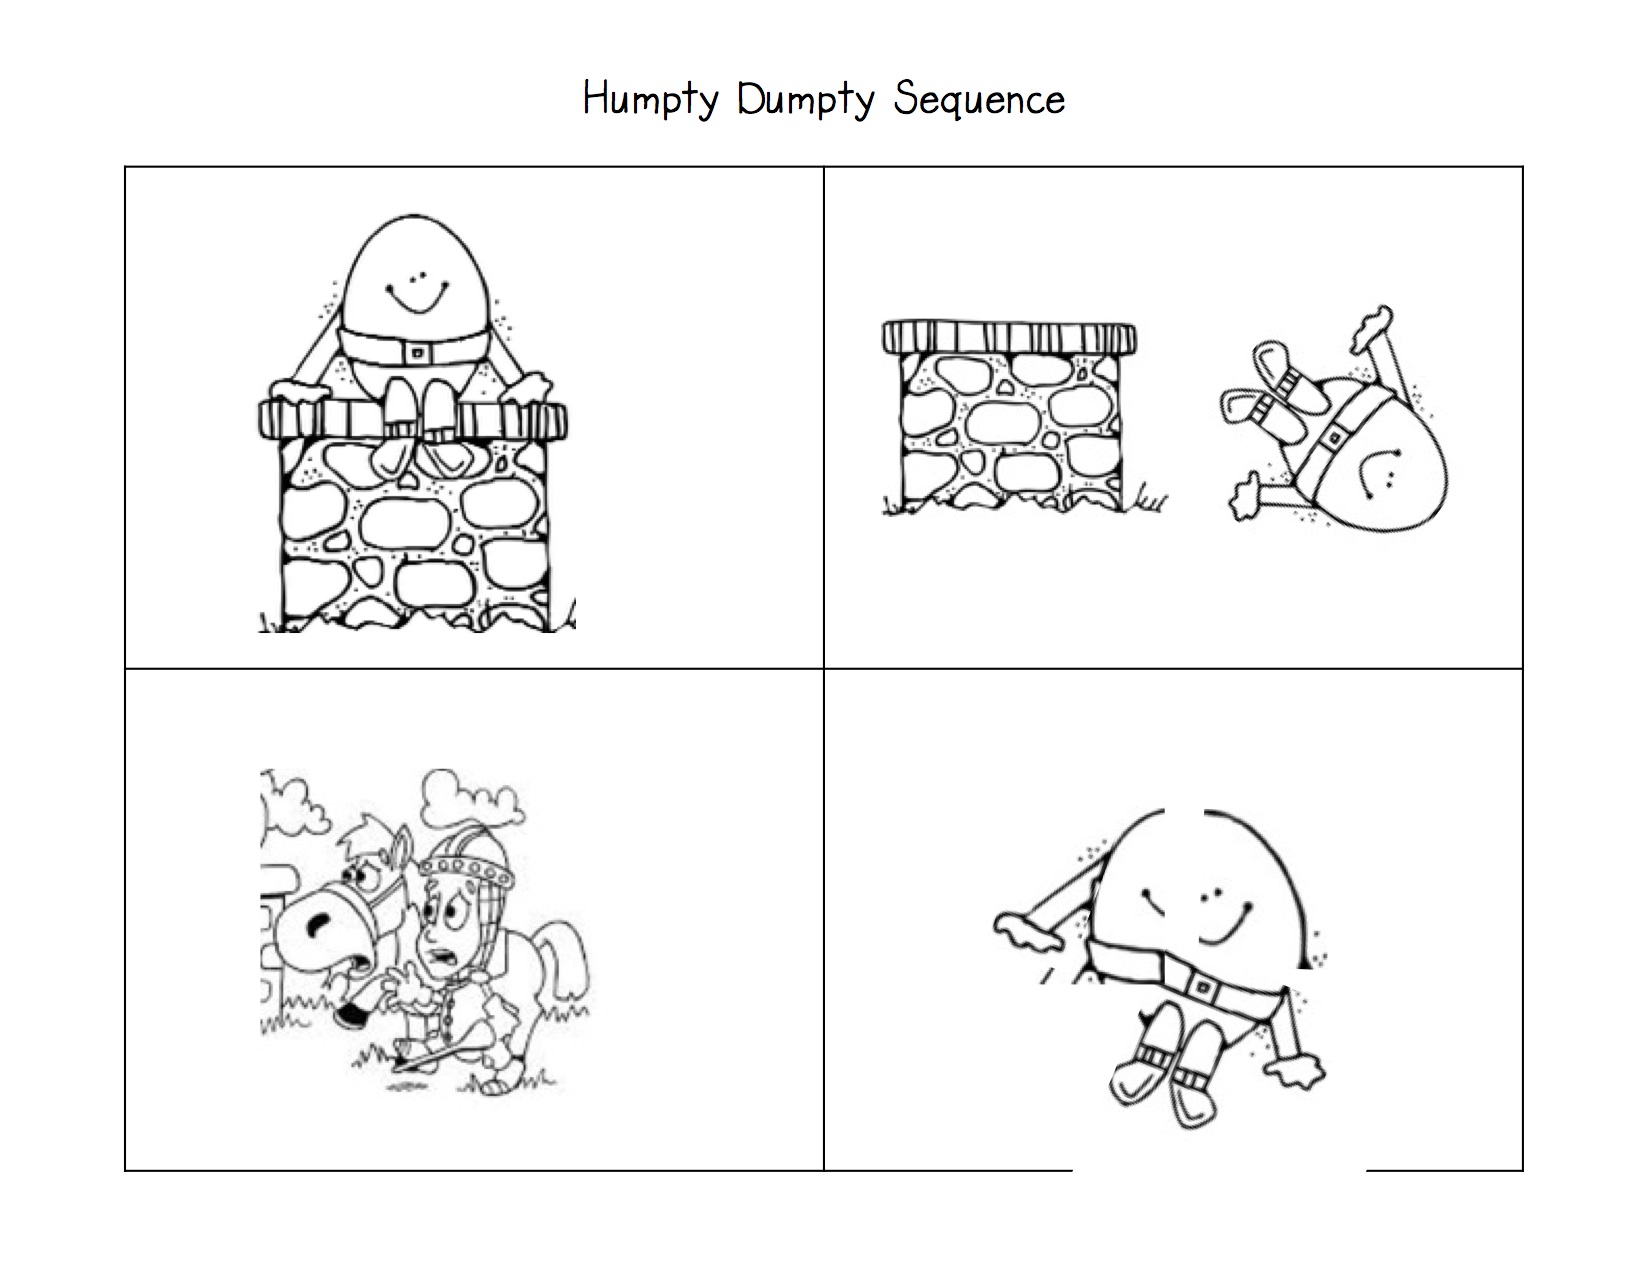 8-best-images-of-humpty-dumpty-printable-sequence-activities-humpty